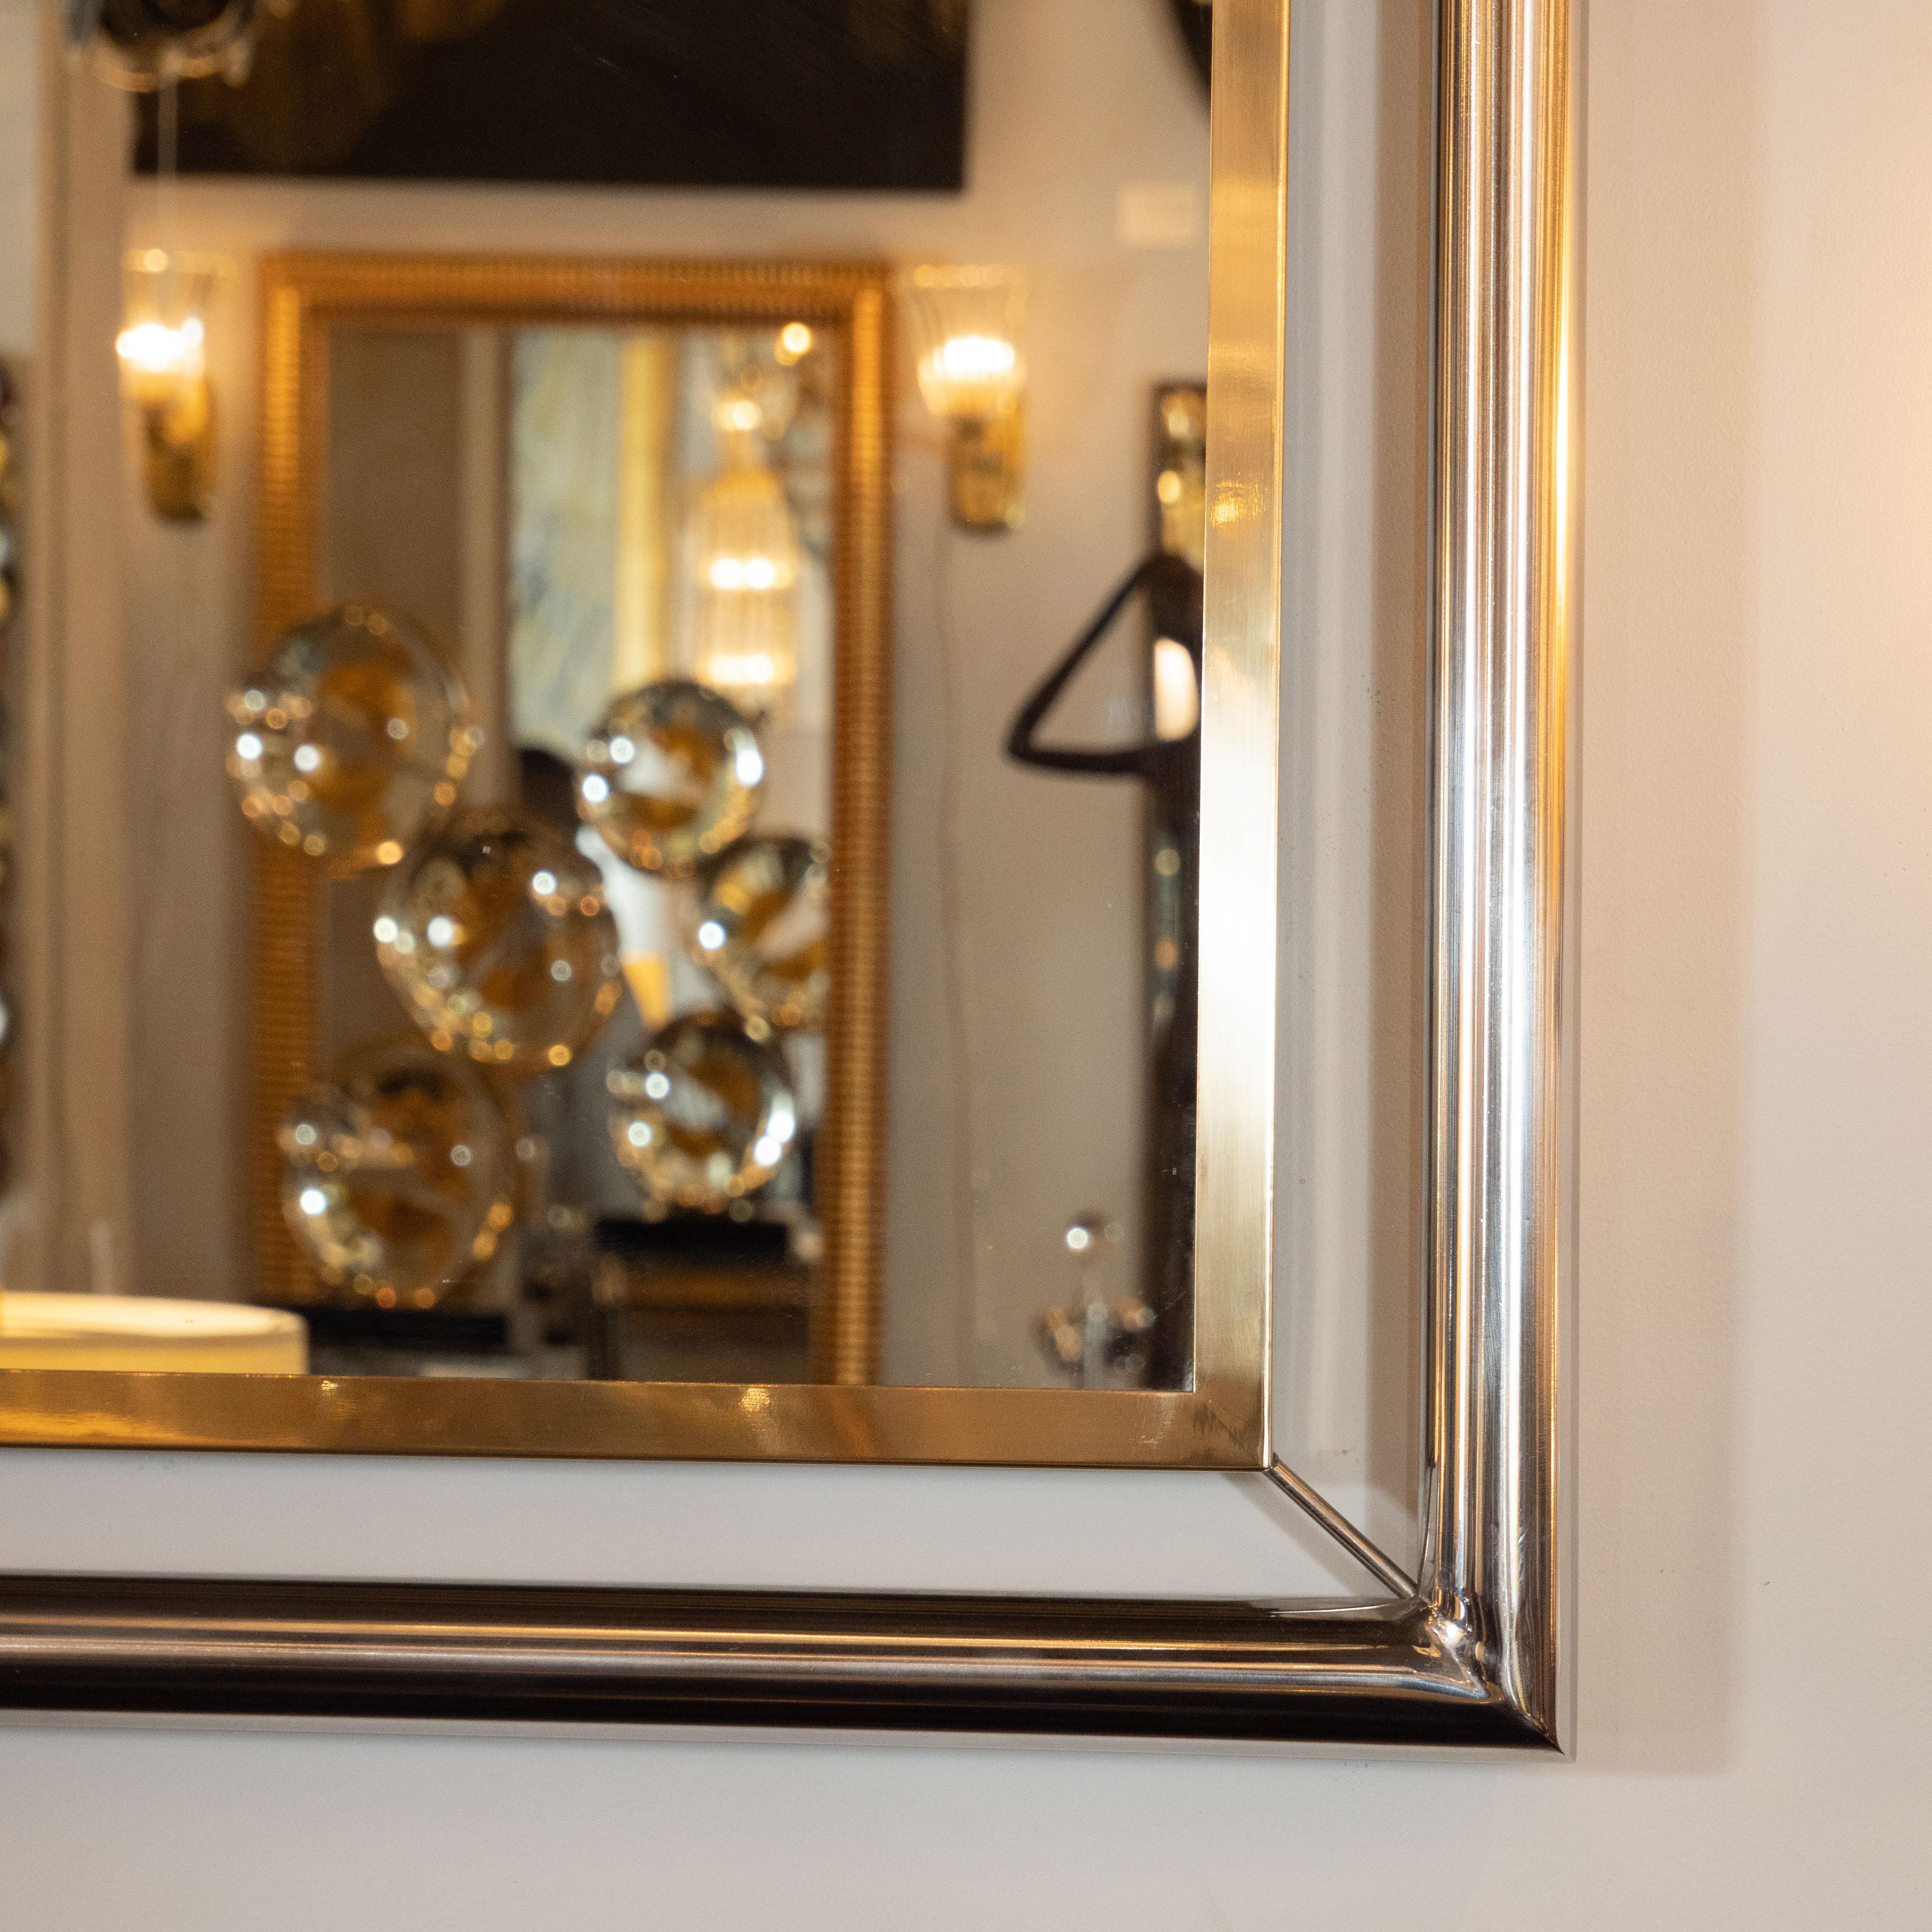 This sophisticated and striking floating wall mirror was realized in the United States, circa 1970. It features a rectangular polished brass frame that is surrounded by a larger frame in lustrous tubular chrome. The inner and outer frames are